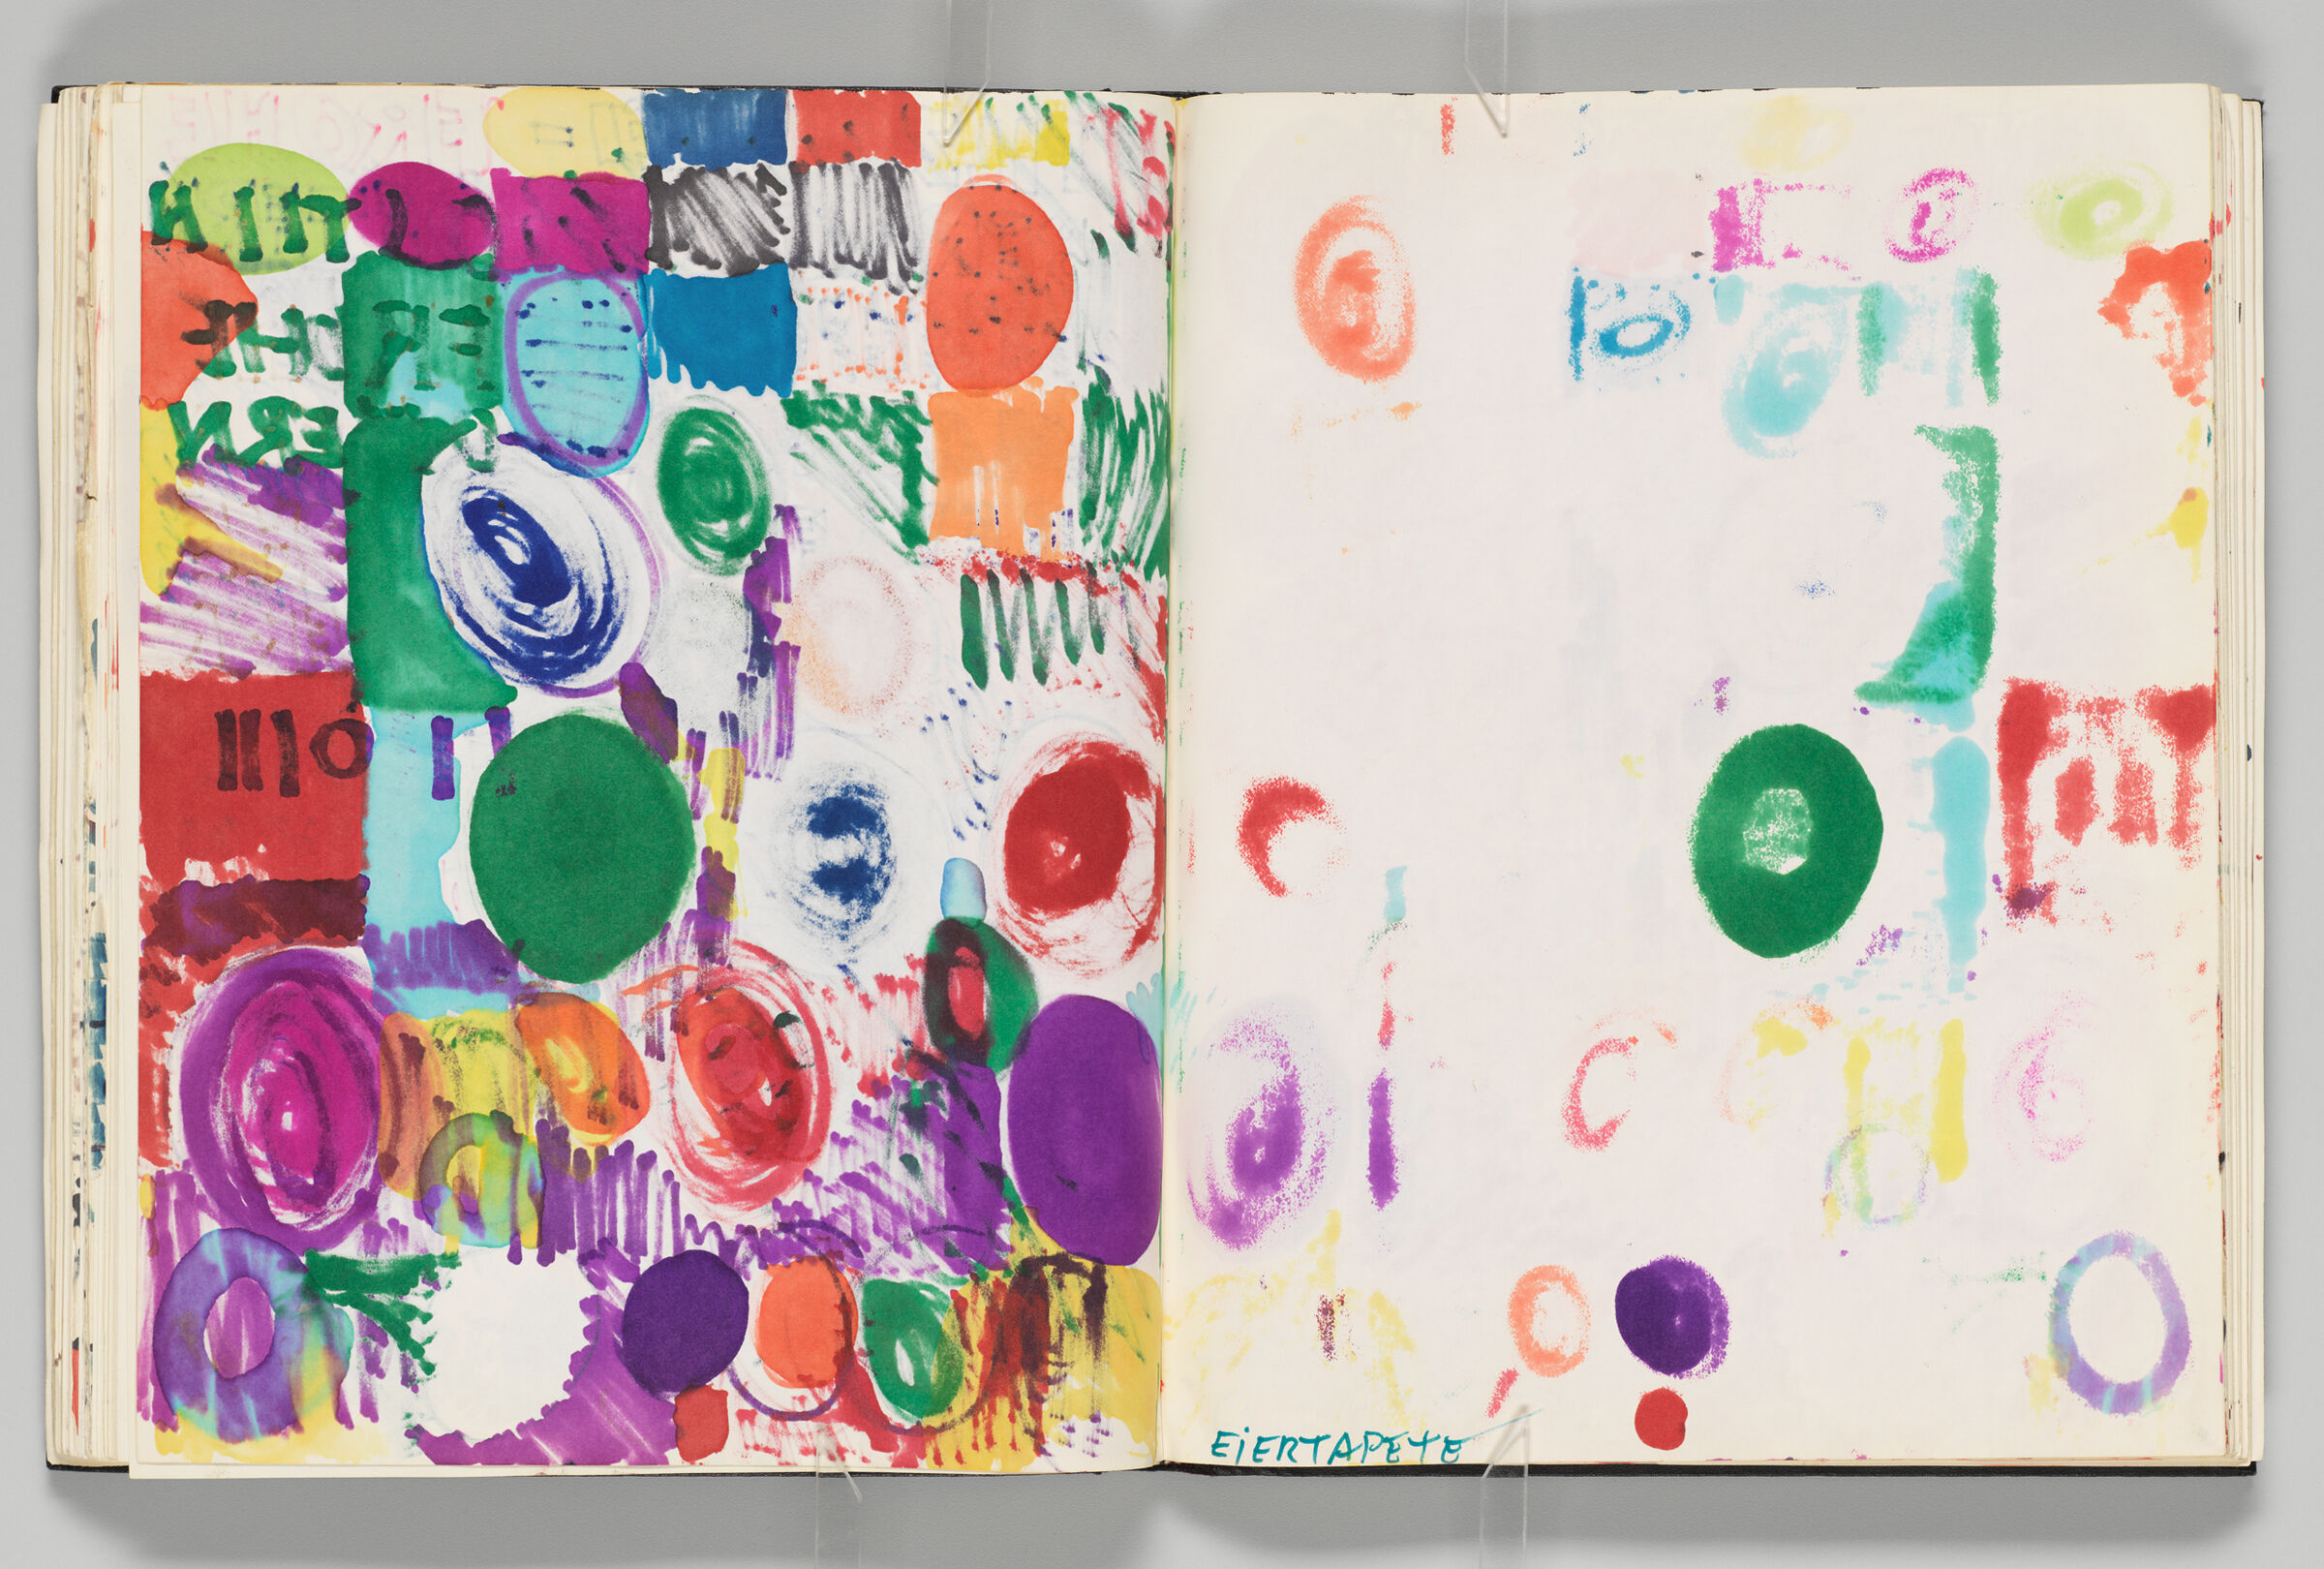 Untitled (Bleed-Through Of Previous Page, Left Page); Untitled (Text With Color Transfer, Right Page)